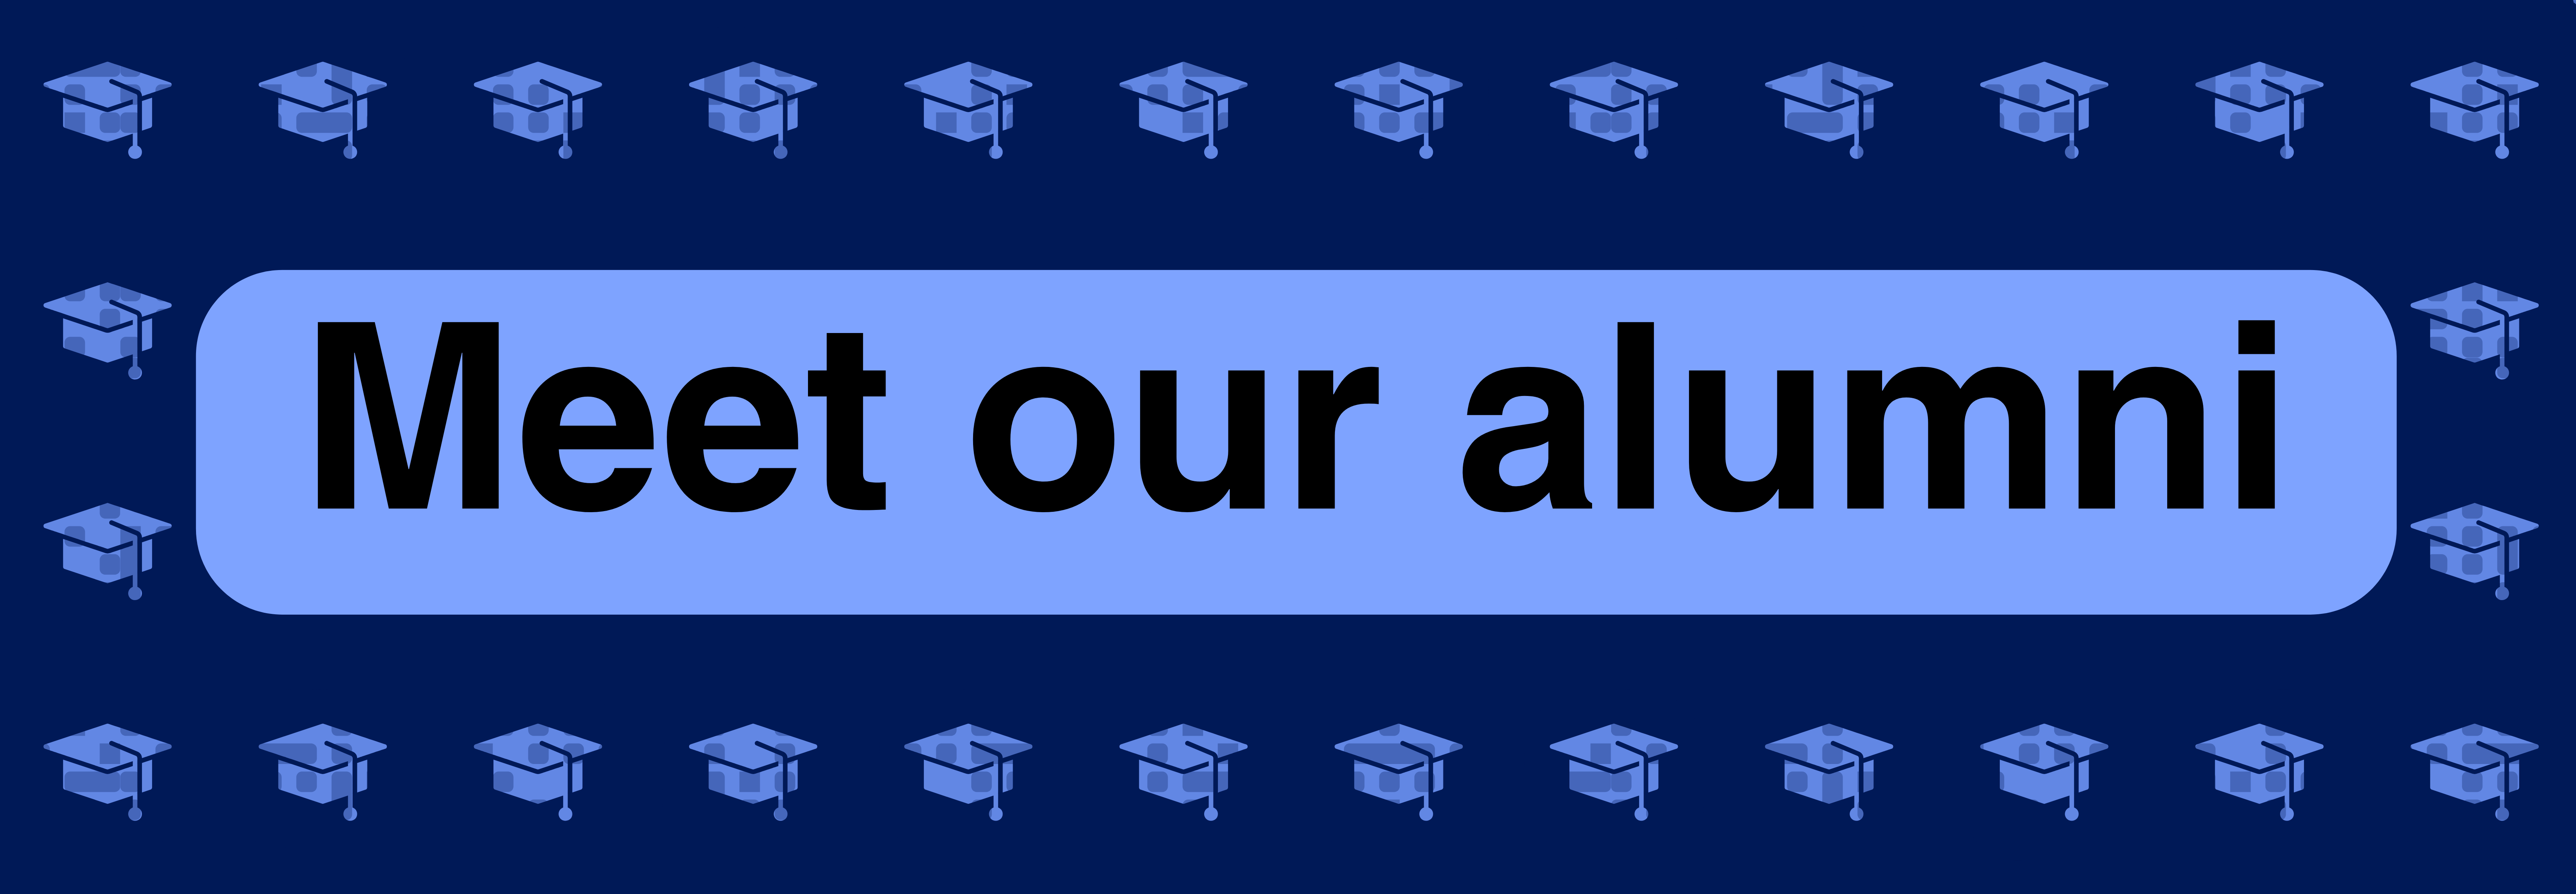 A blue graphic with motar boards and text reading 'Meet our alumni'.